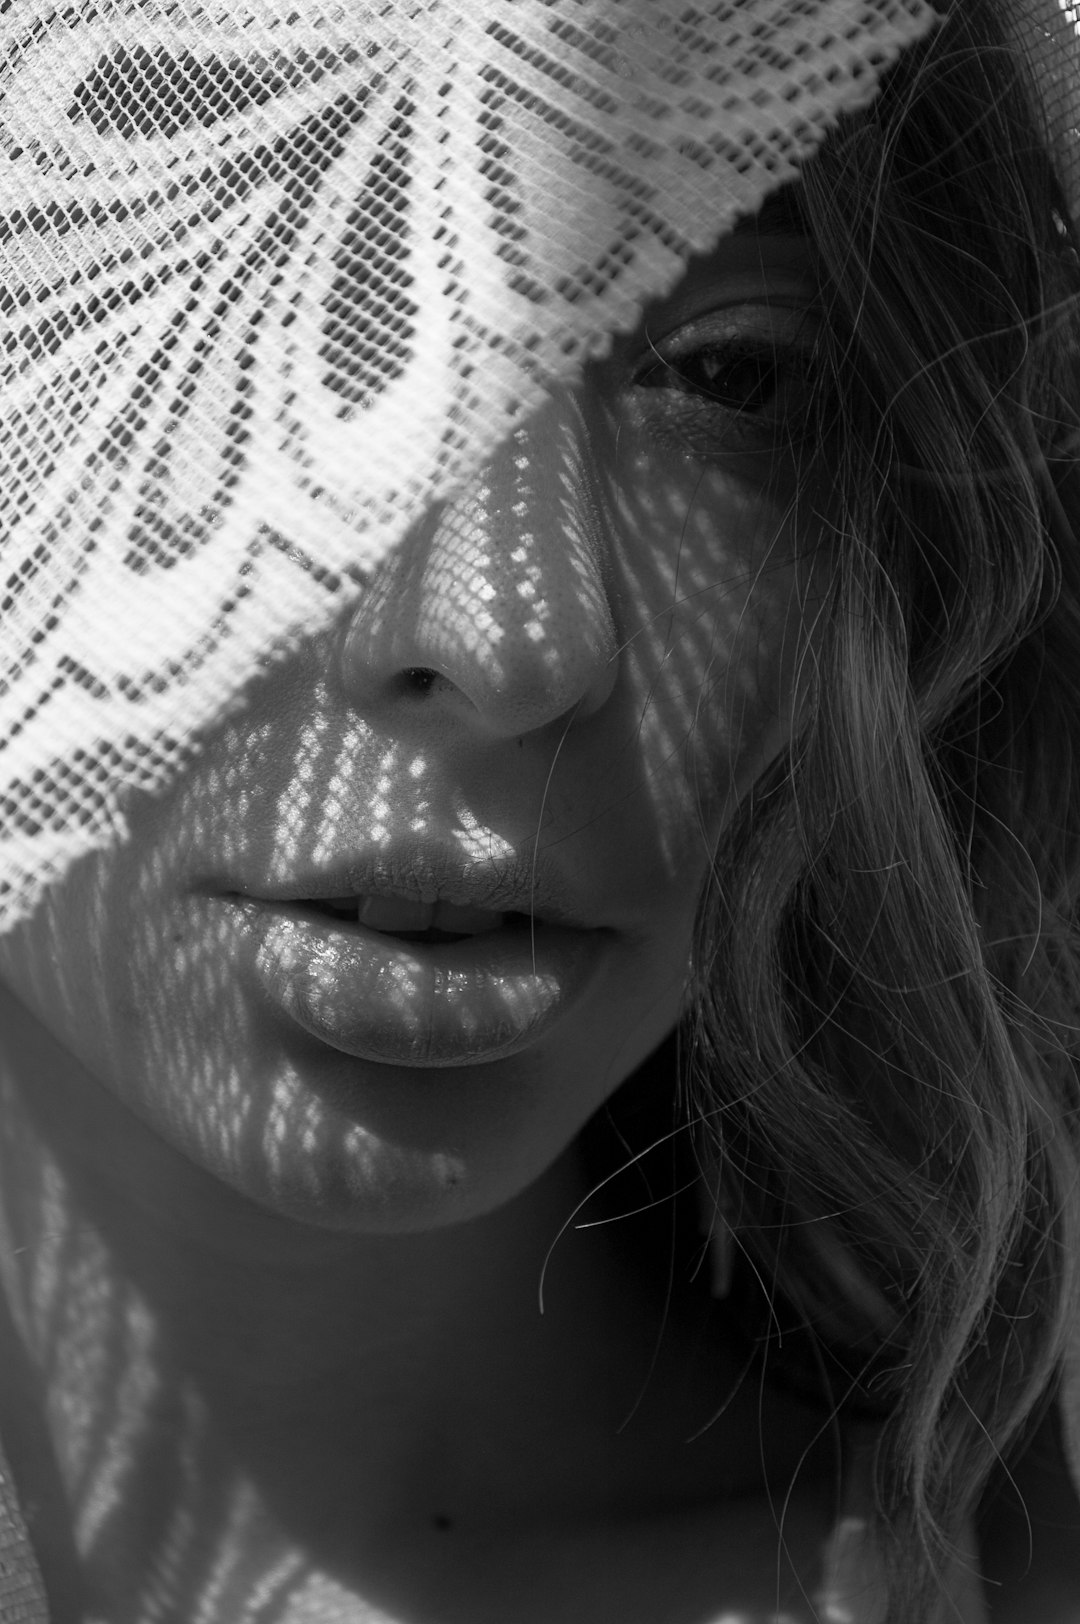 grayscale photo of woman in close up